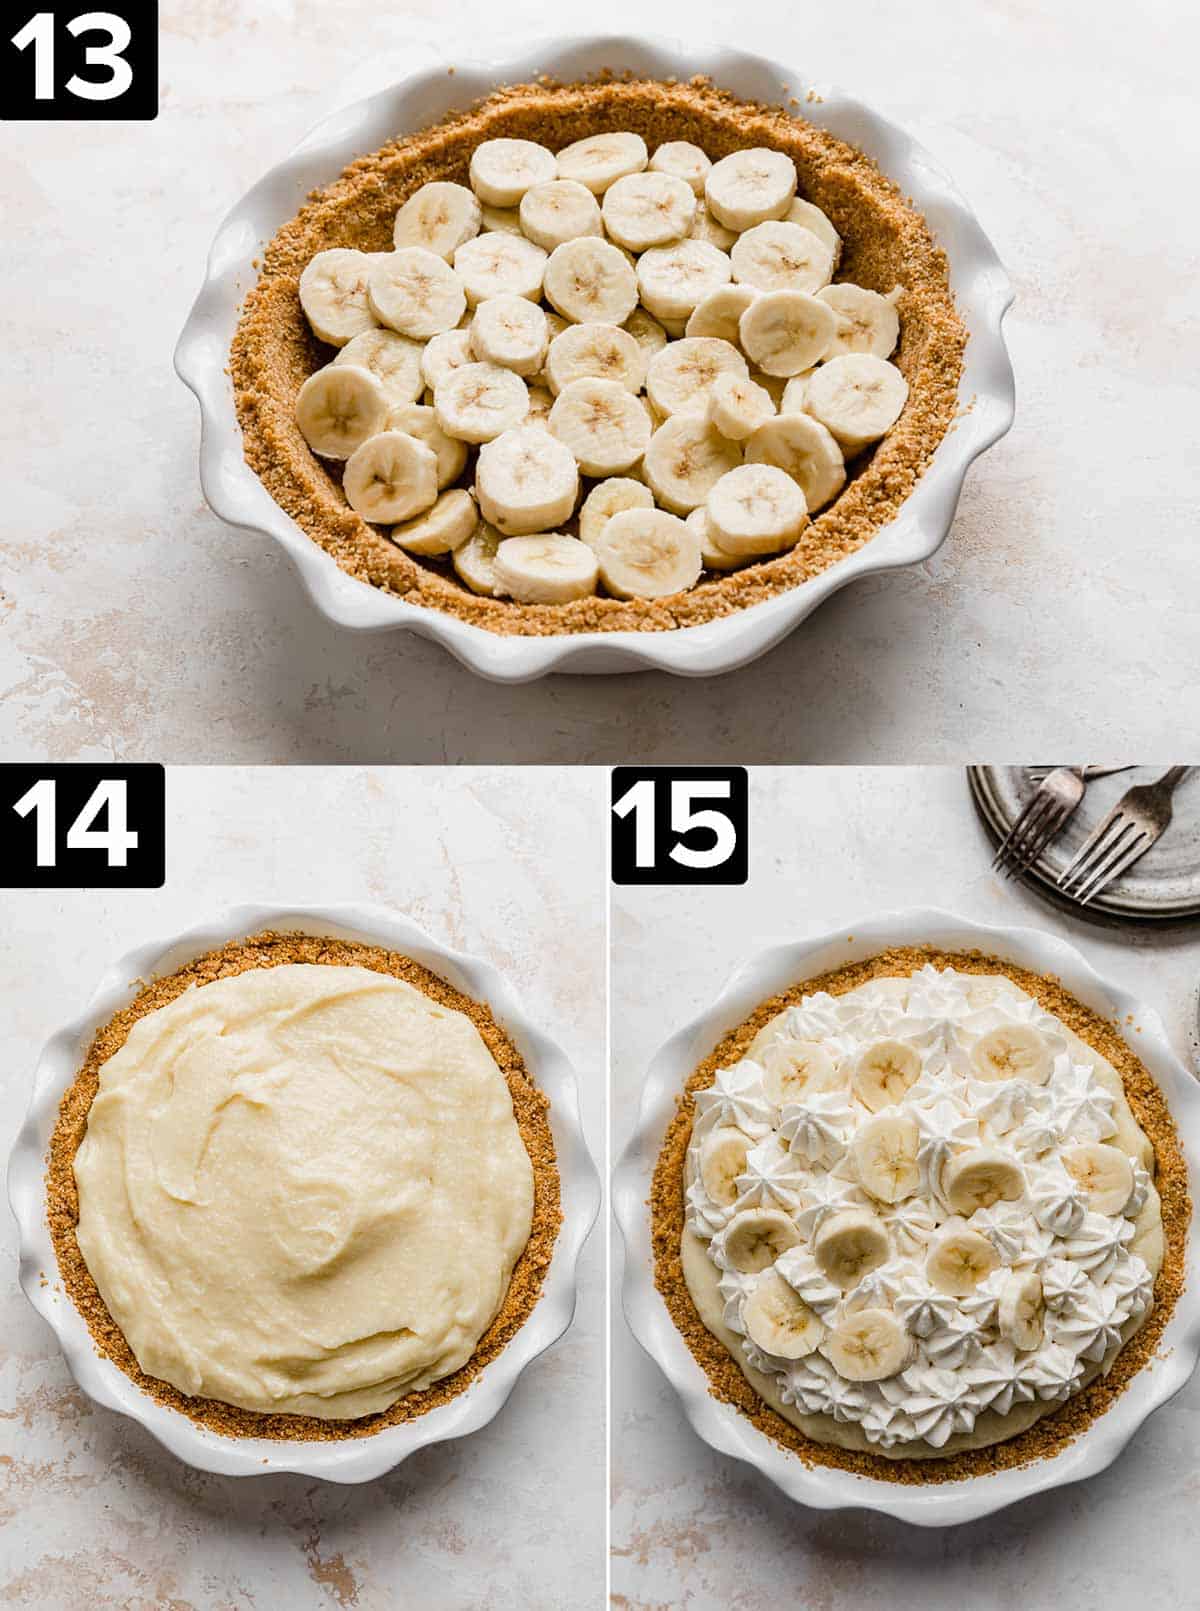 A pie crust with sliced bananas in it, then two photos beneath it (left photo) has banana cream pie custard in the crust, and the right photo is the pie topped with whipped cream and banana slices.